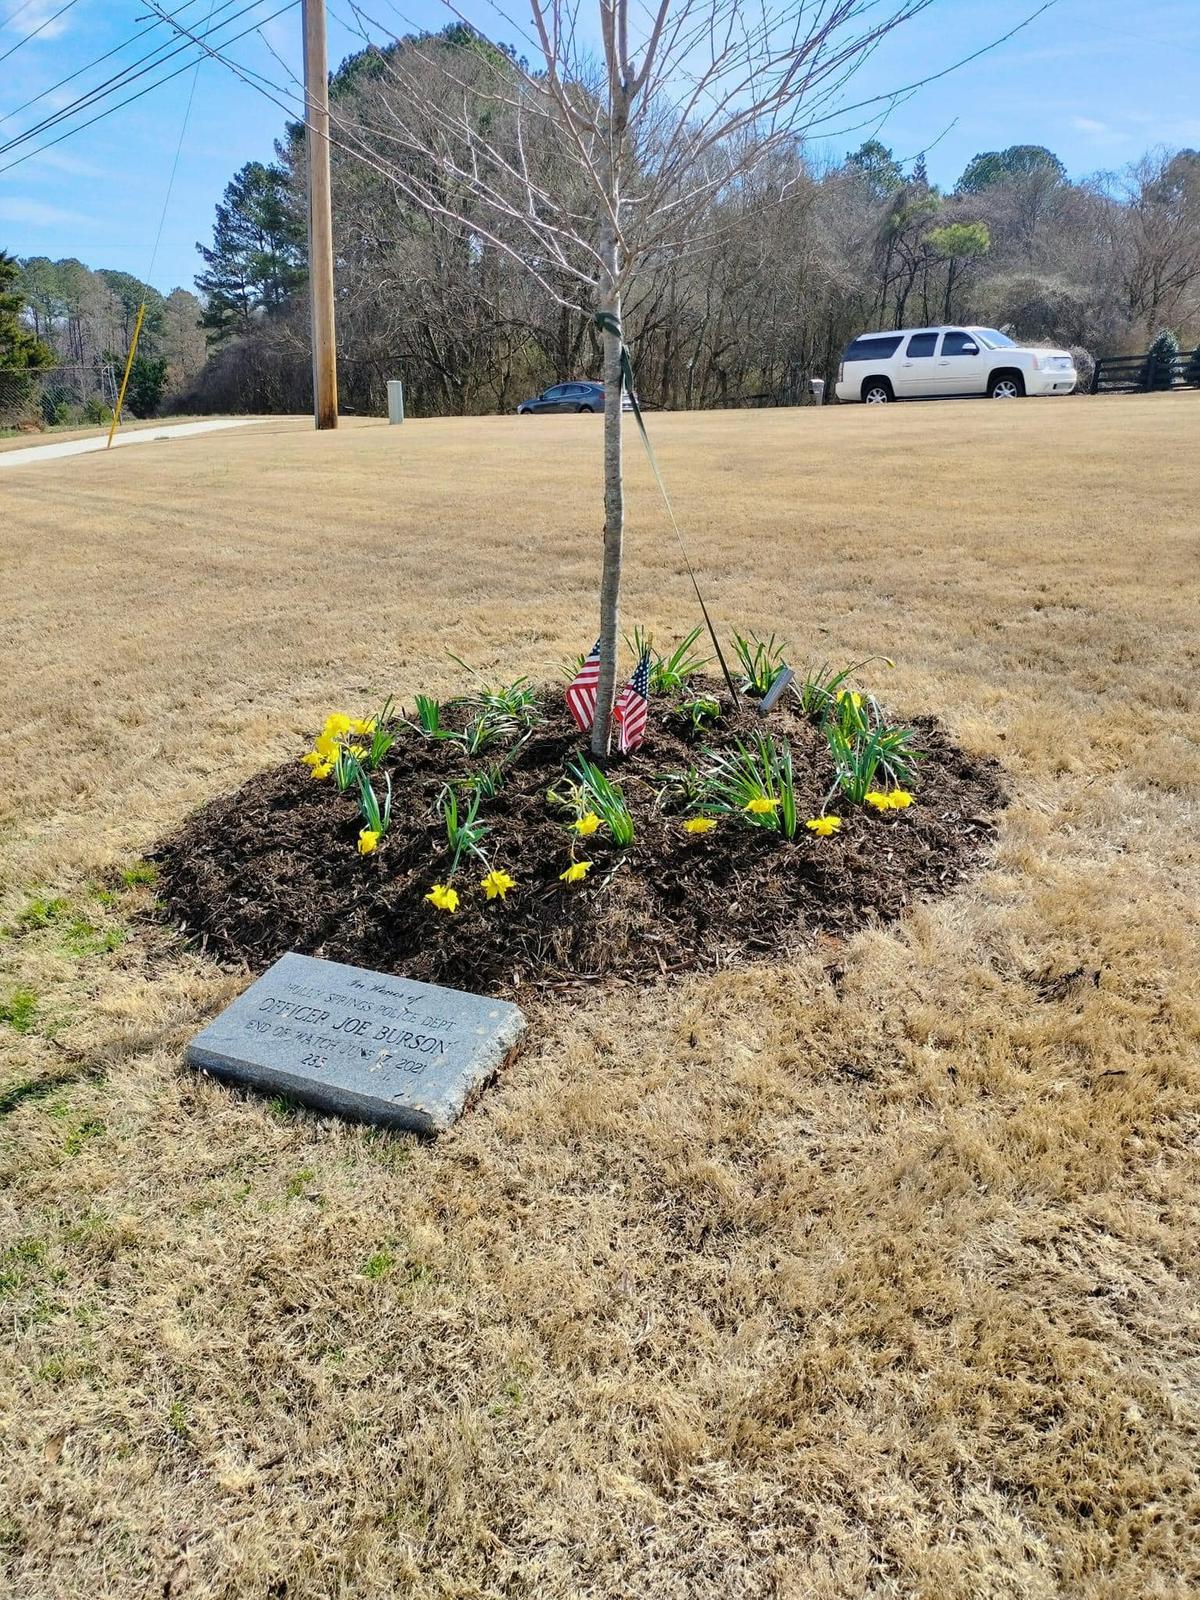 Officer Joe Burson's memorial, complete with the daffodils planted by the Chancer family. (Courtesy of Kristina Chancer)